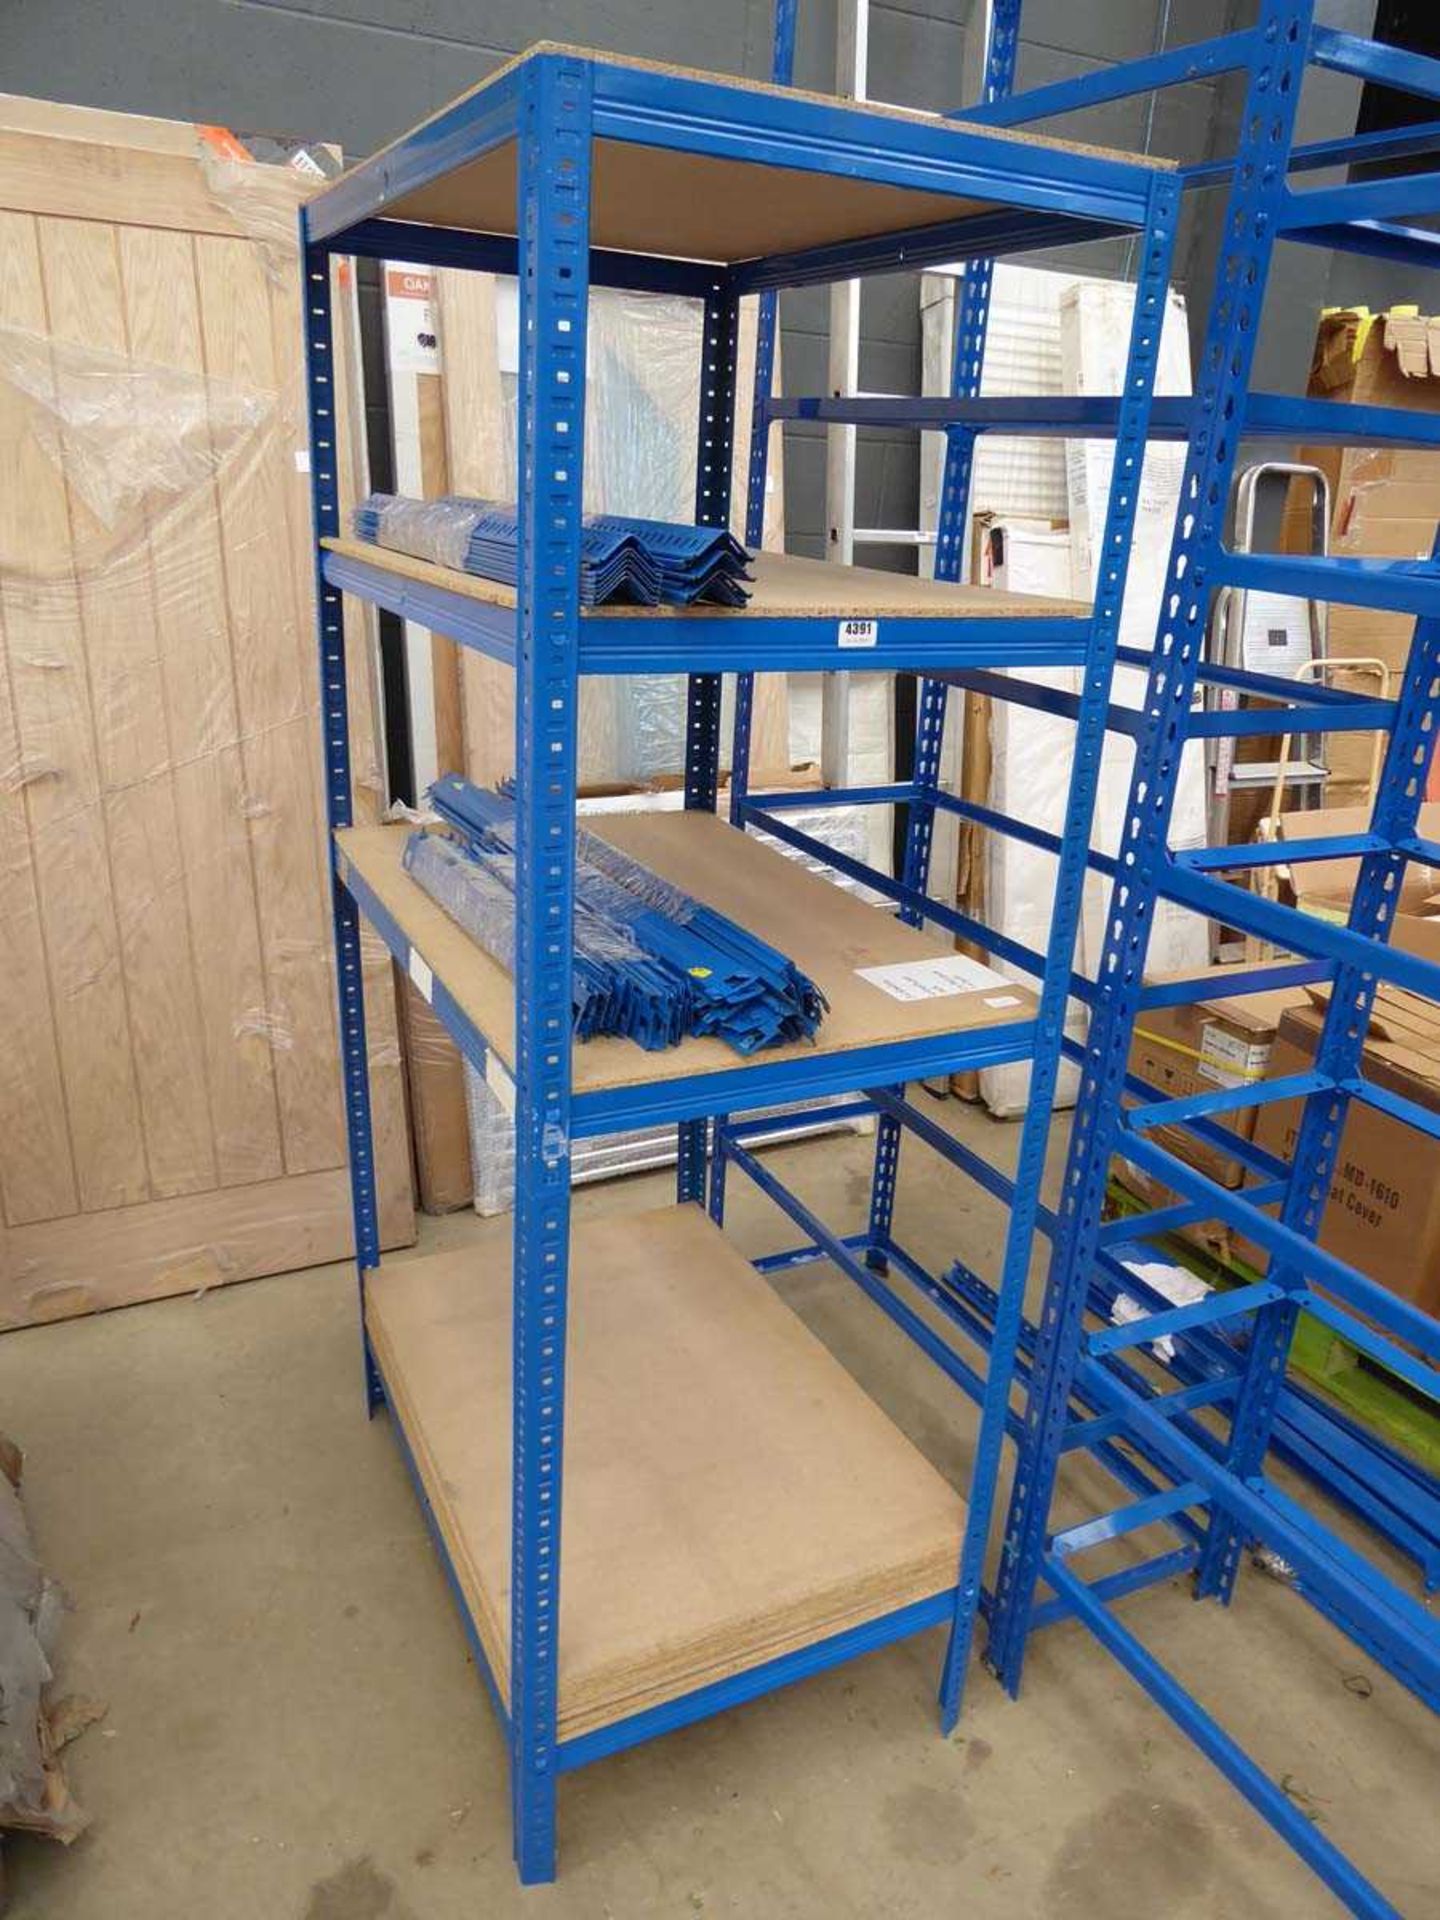 +VAT 1 made-up bay, and 2 flatpack bays of 6ft blue racking with chipboard shelves